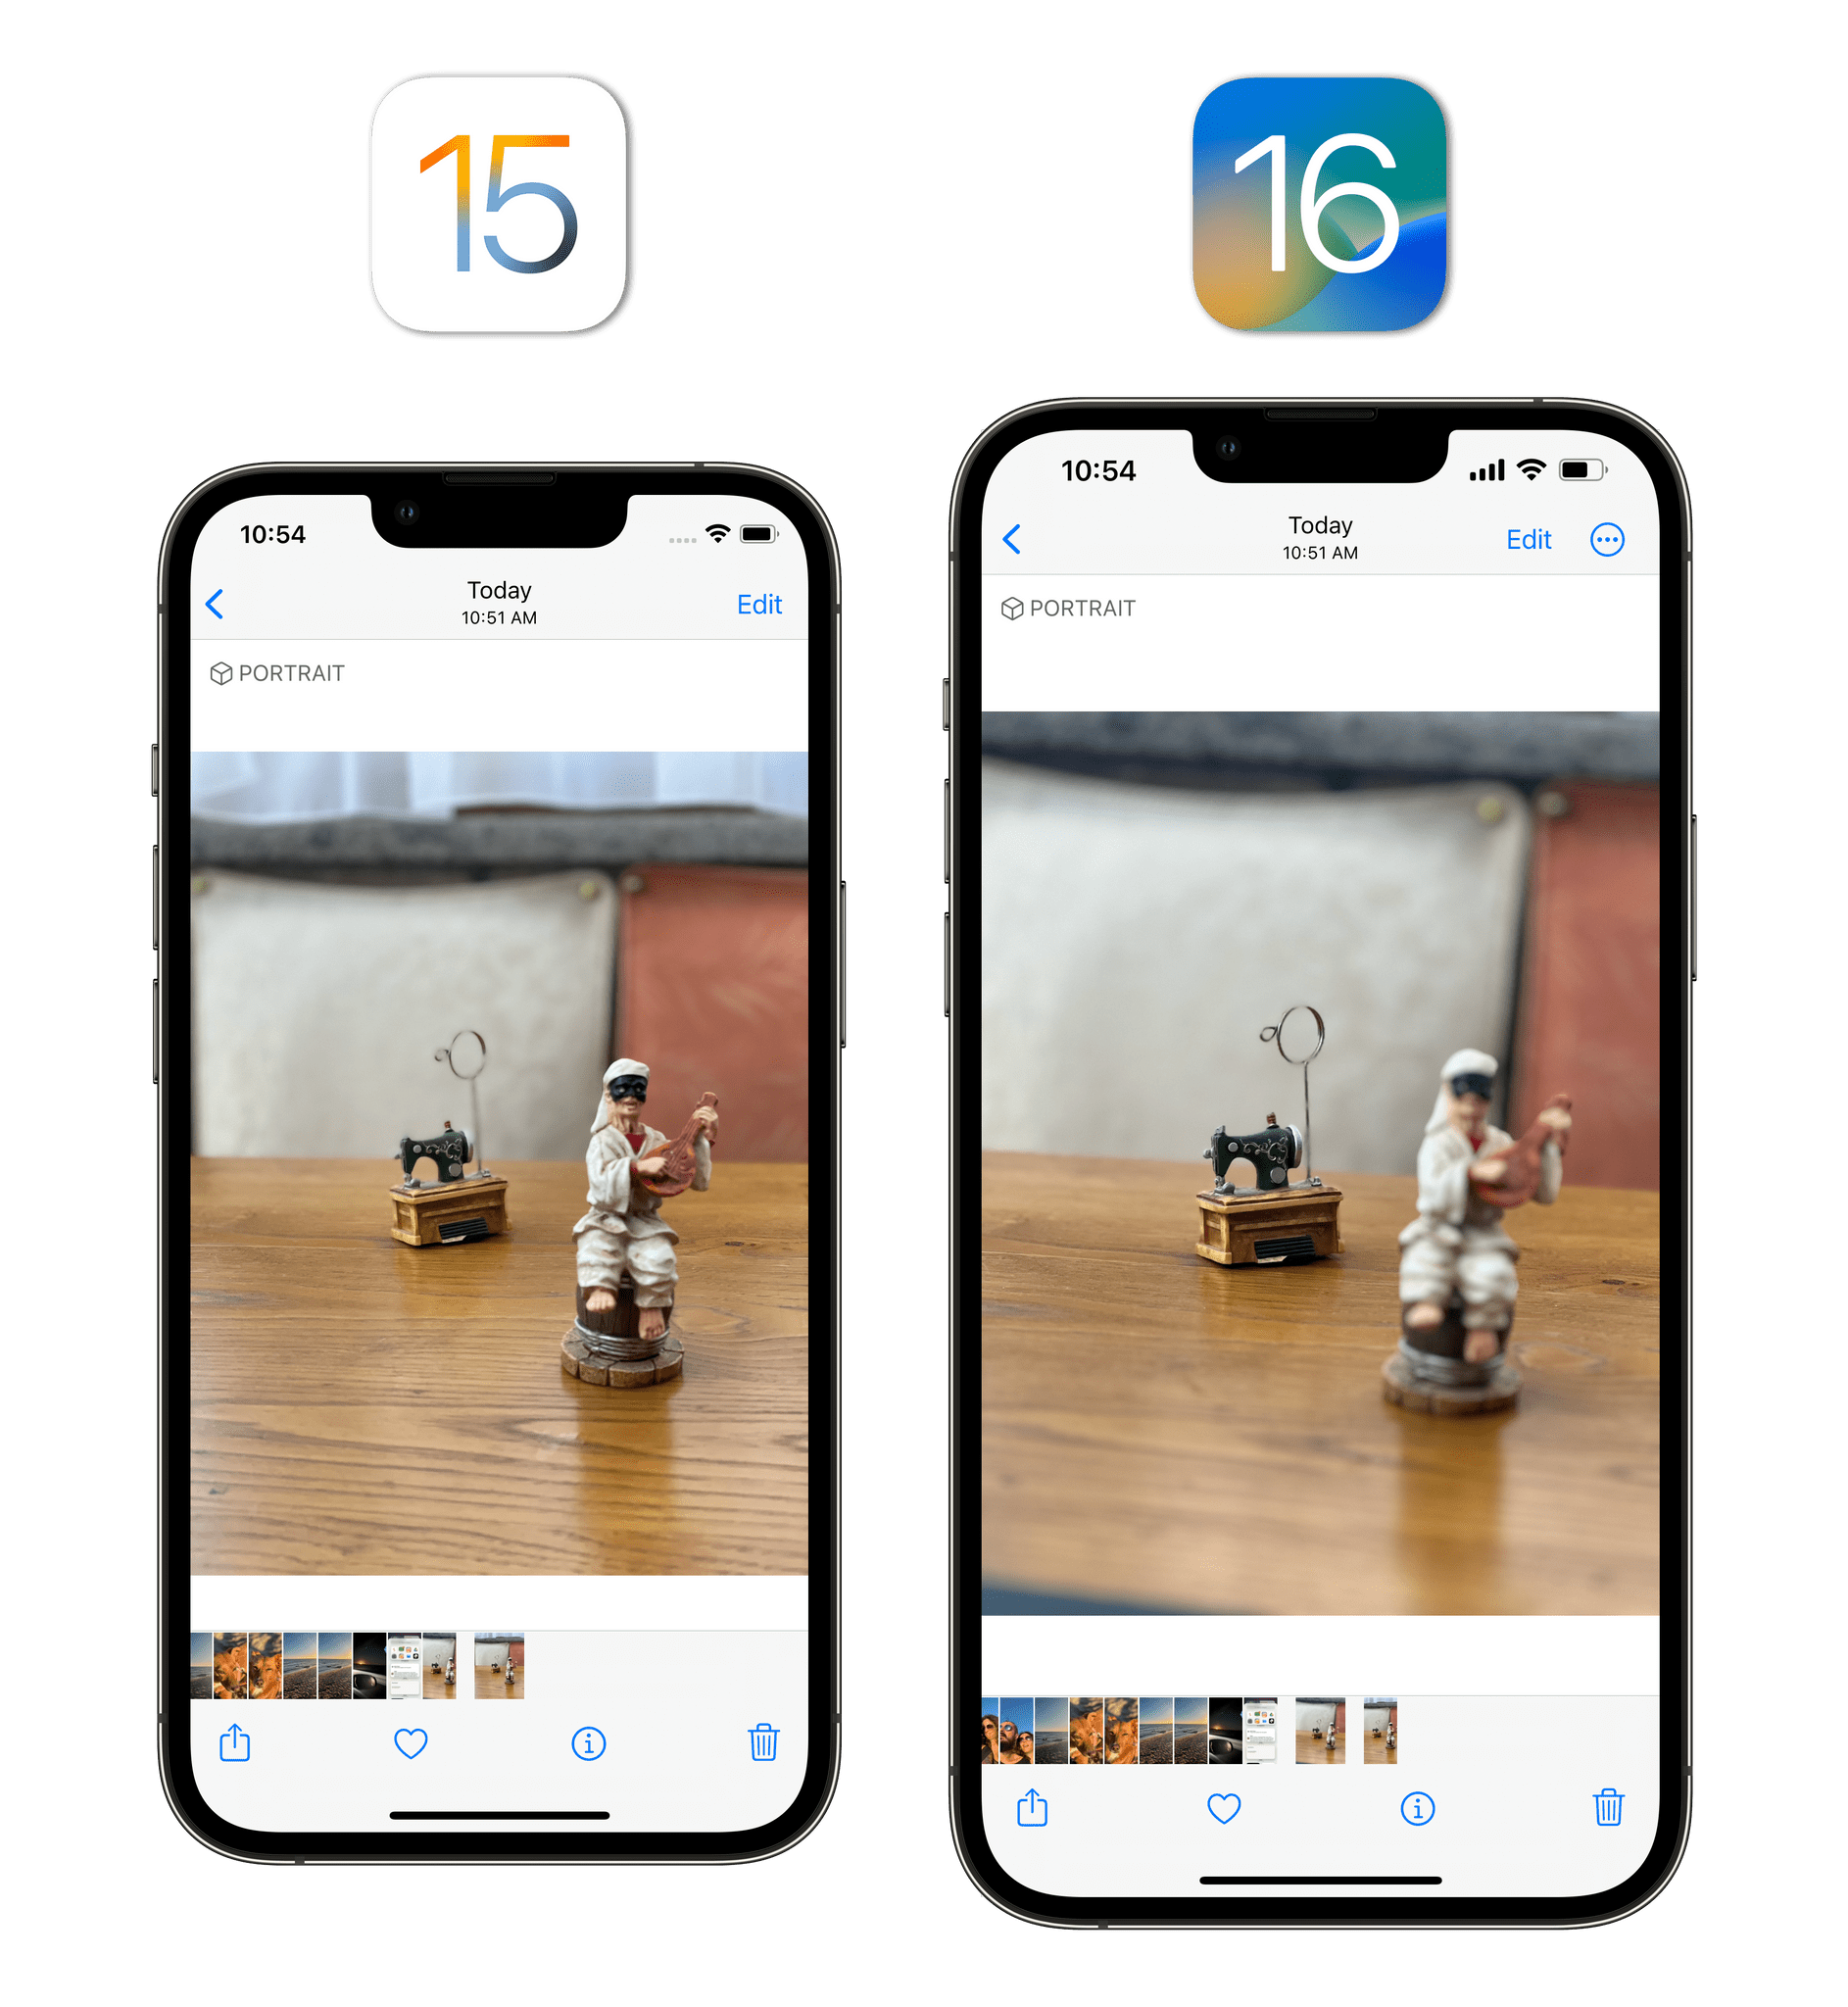 Portrait mode foreground blur as seen on an iPhone 13 Pro Max (right). Notice how the white figurine on the right gets blurred in iOS 16.